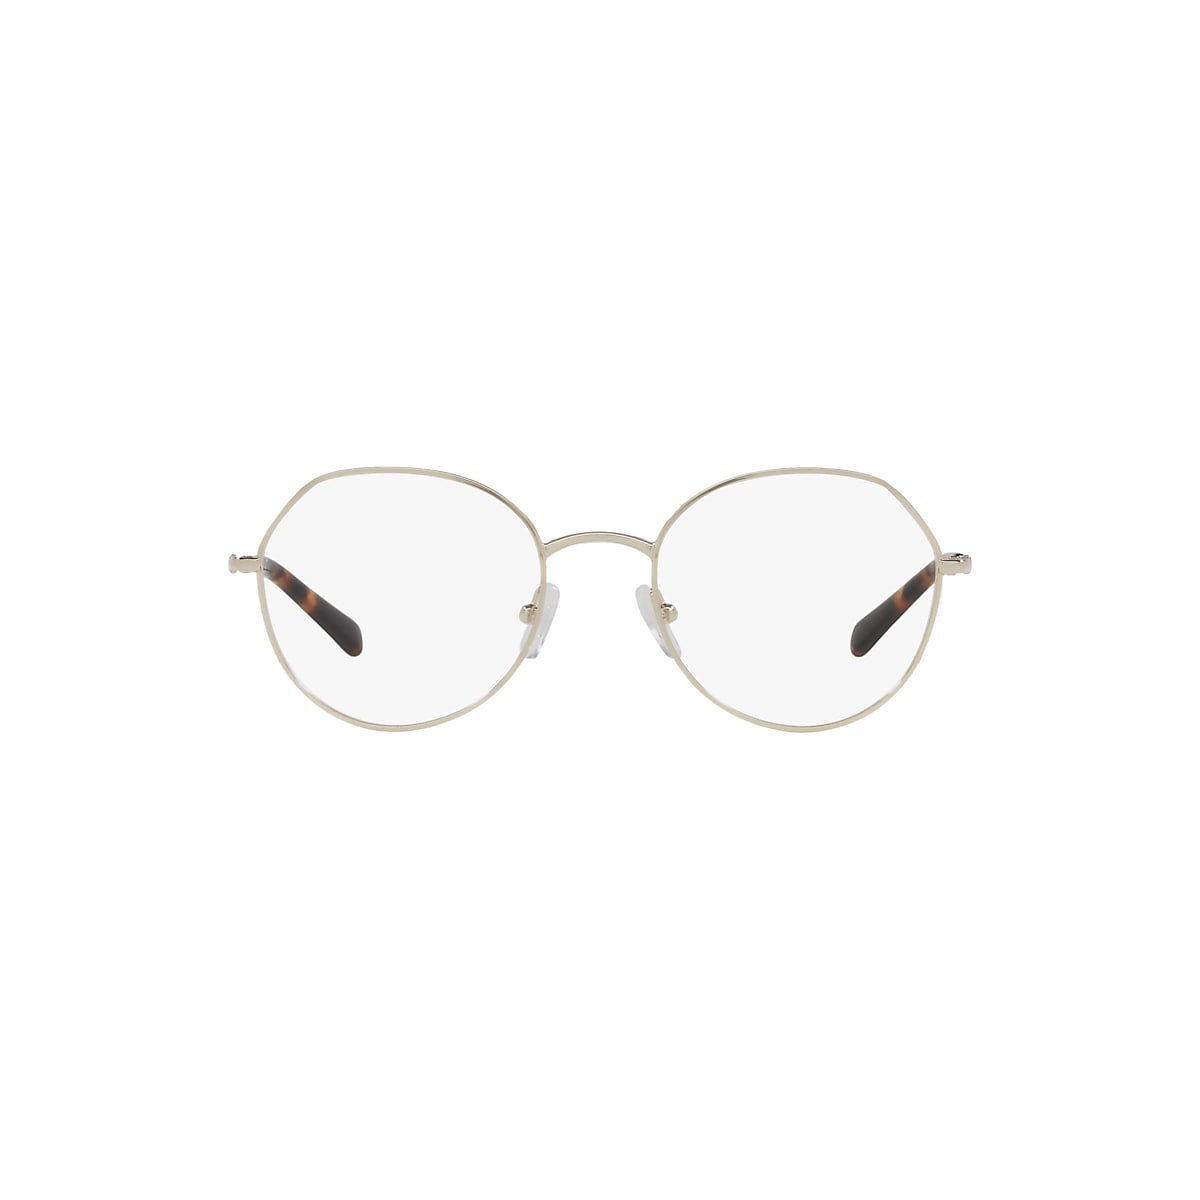 Armani Exchange 0AX1048 Glasses in Gold | Target Optical